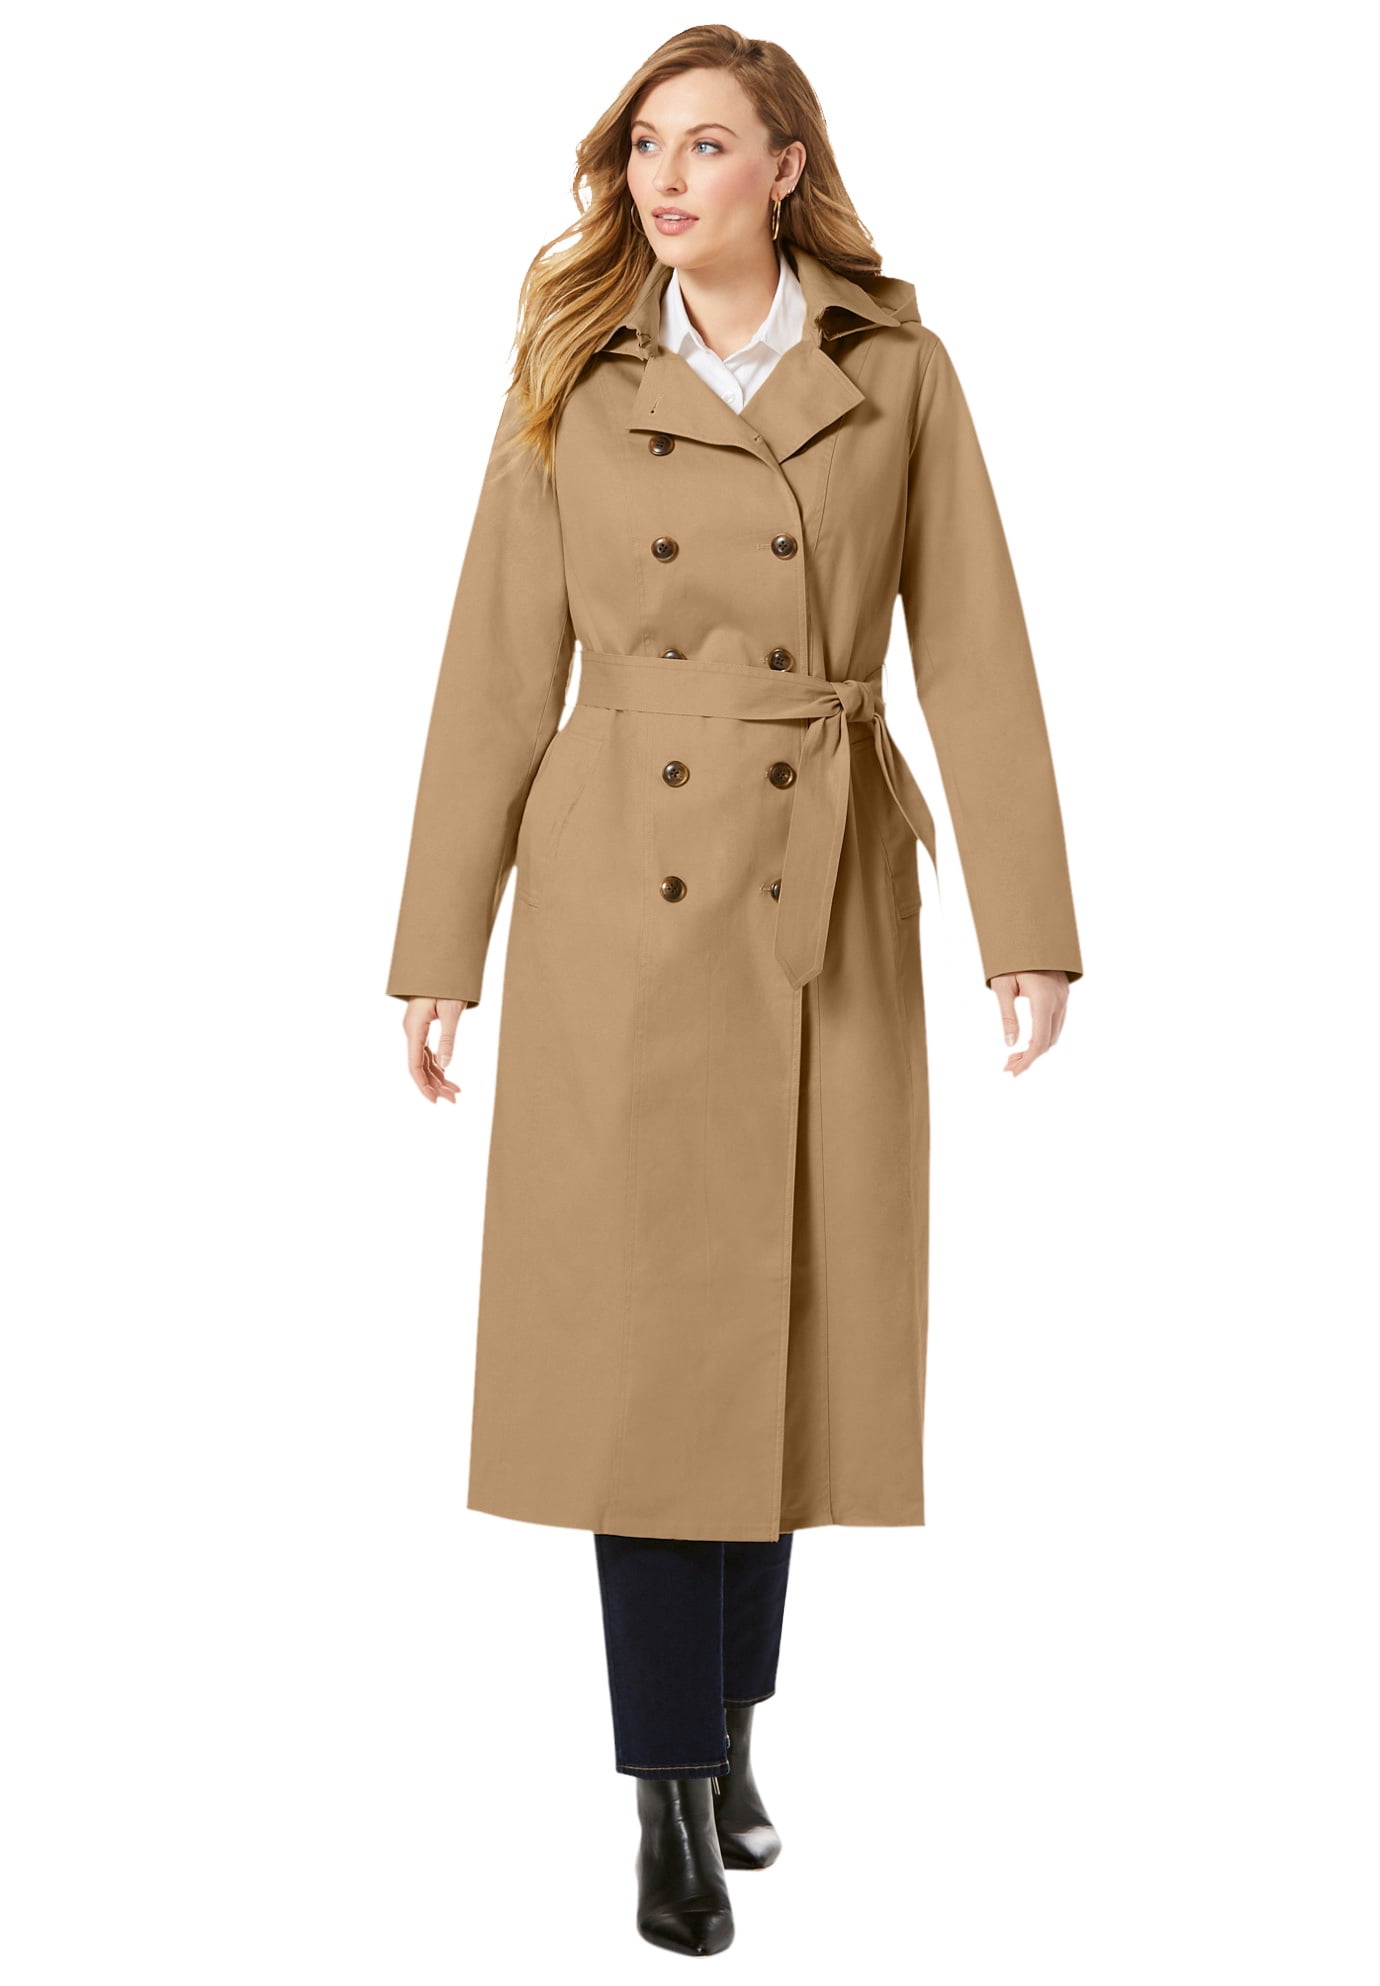 Womens Relaxed Fit Double Breasted Real Brown Leather Trench Coat